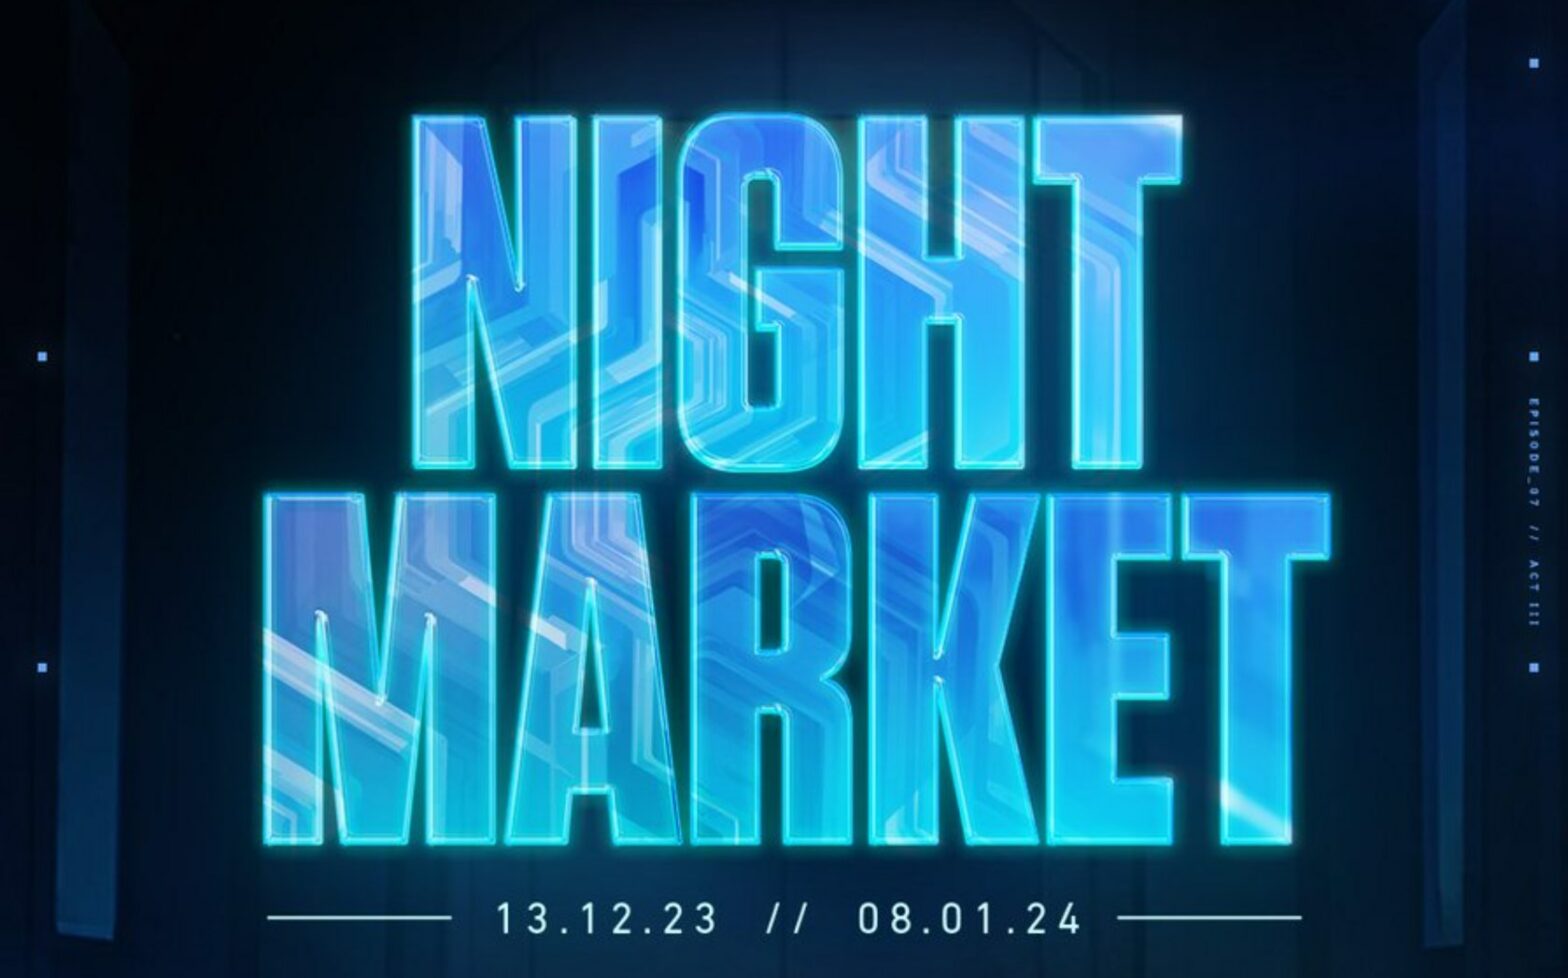 how to Check out your VALORANT night market when you are not at Home#v